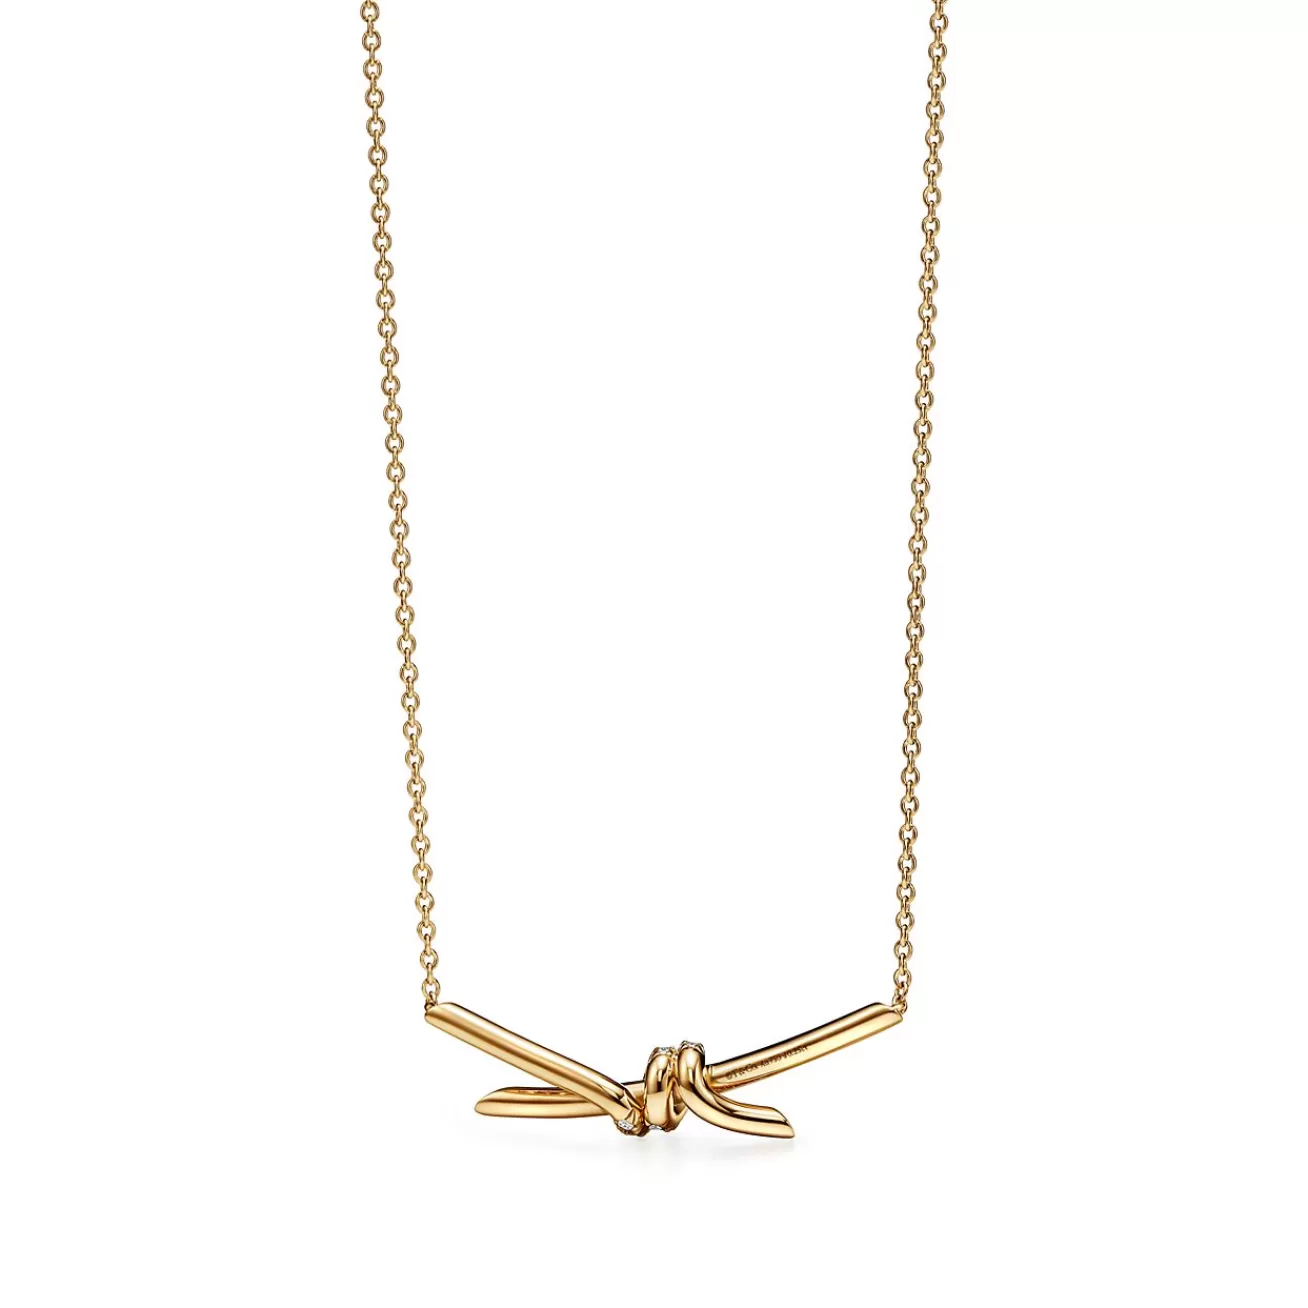 Tiffany & Co. Tiffany Knot Pendant in Yellow Gold with Diamonds | ^ Necklaces & Pendants | Gifts for Her